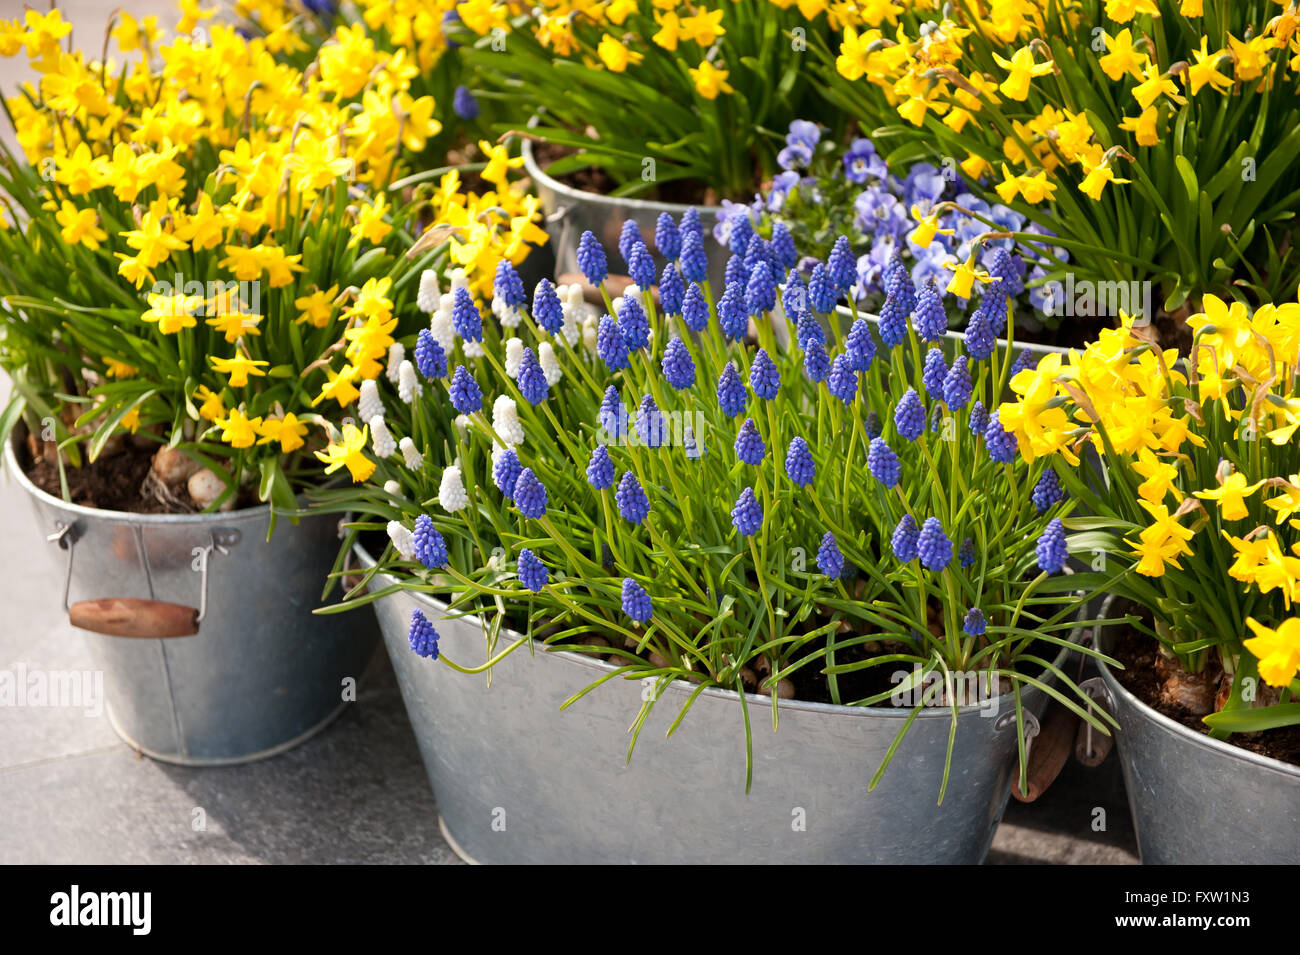 Daffodil and grape hyacinth blooming flowers city decoration, yellow and blue flowering plants growing in metal flower buckets Stock Photo